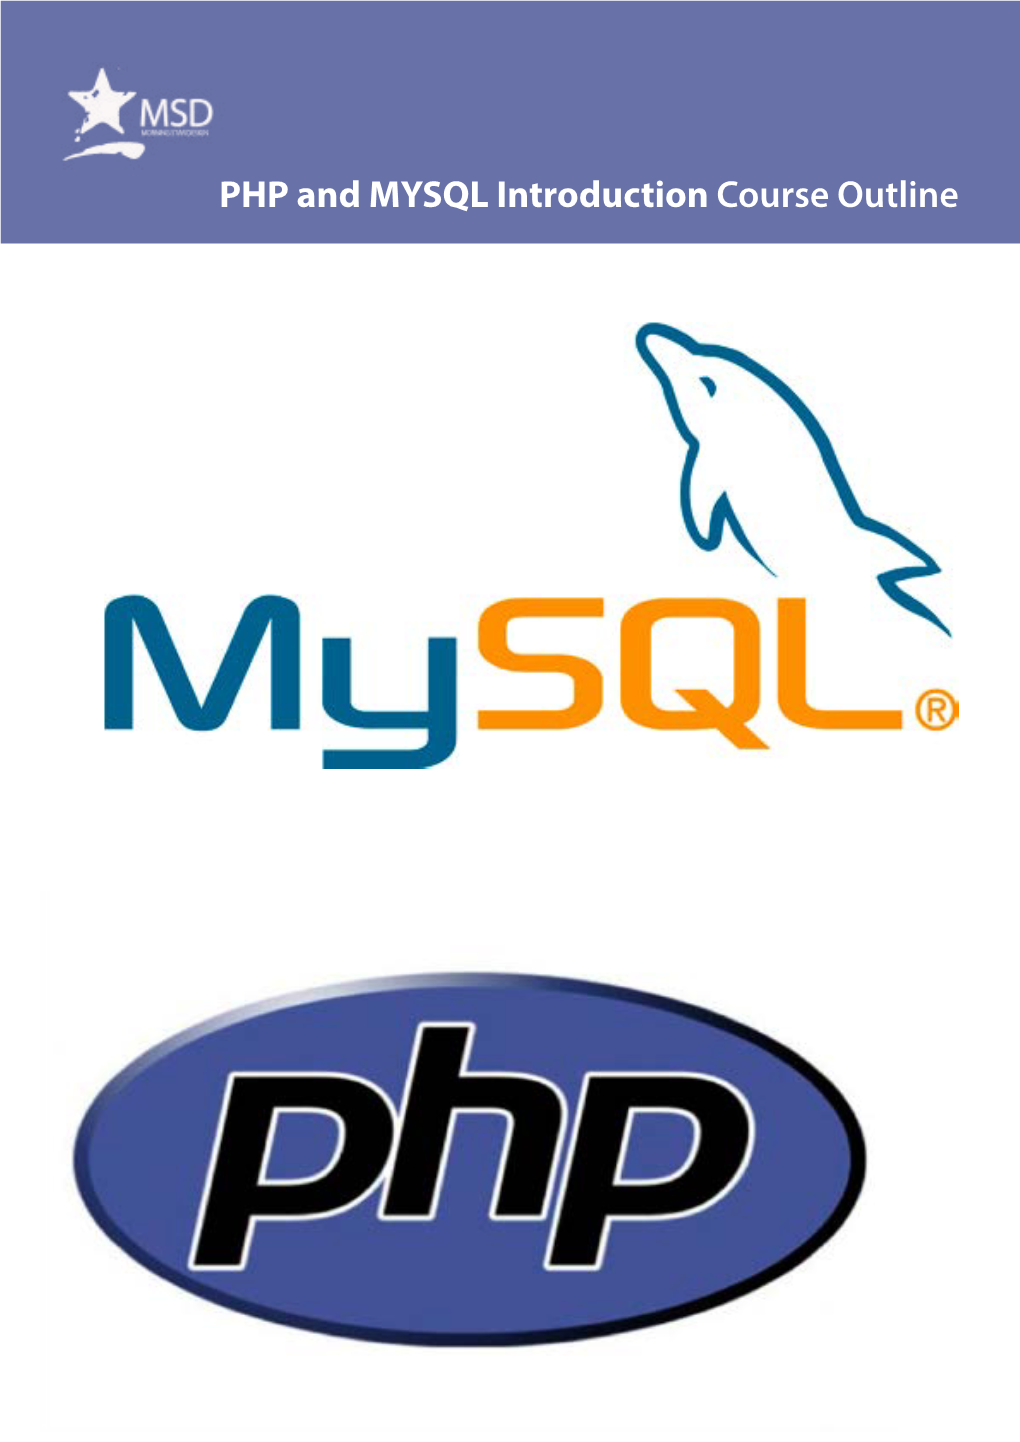 PHP and MYSQL Introduction Course Outline